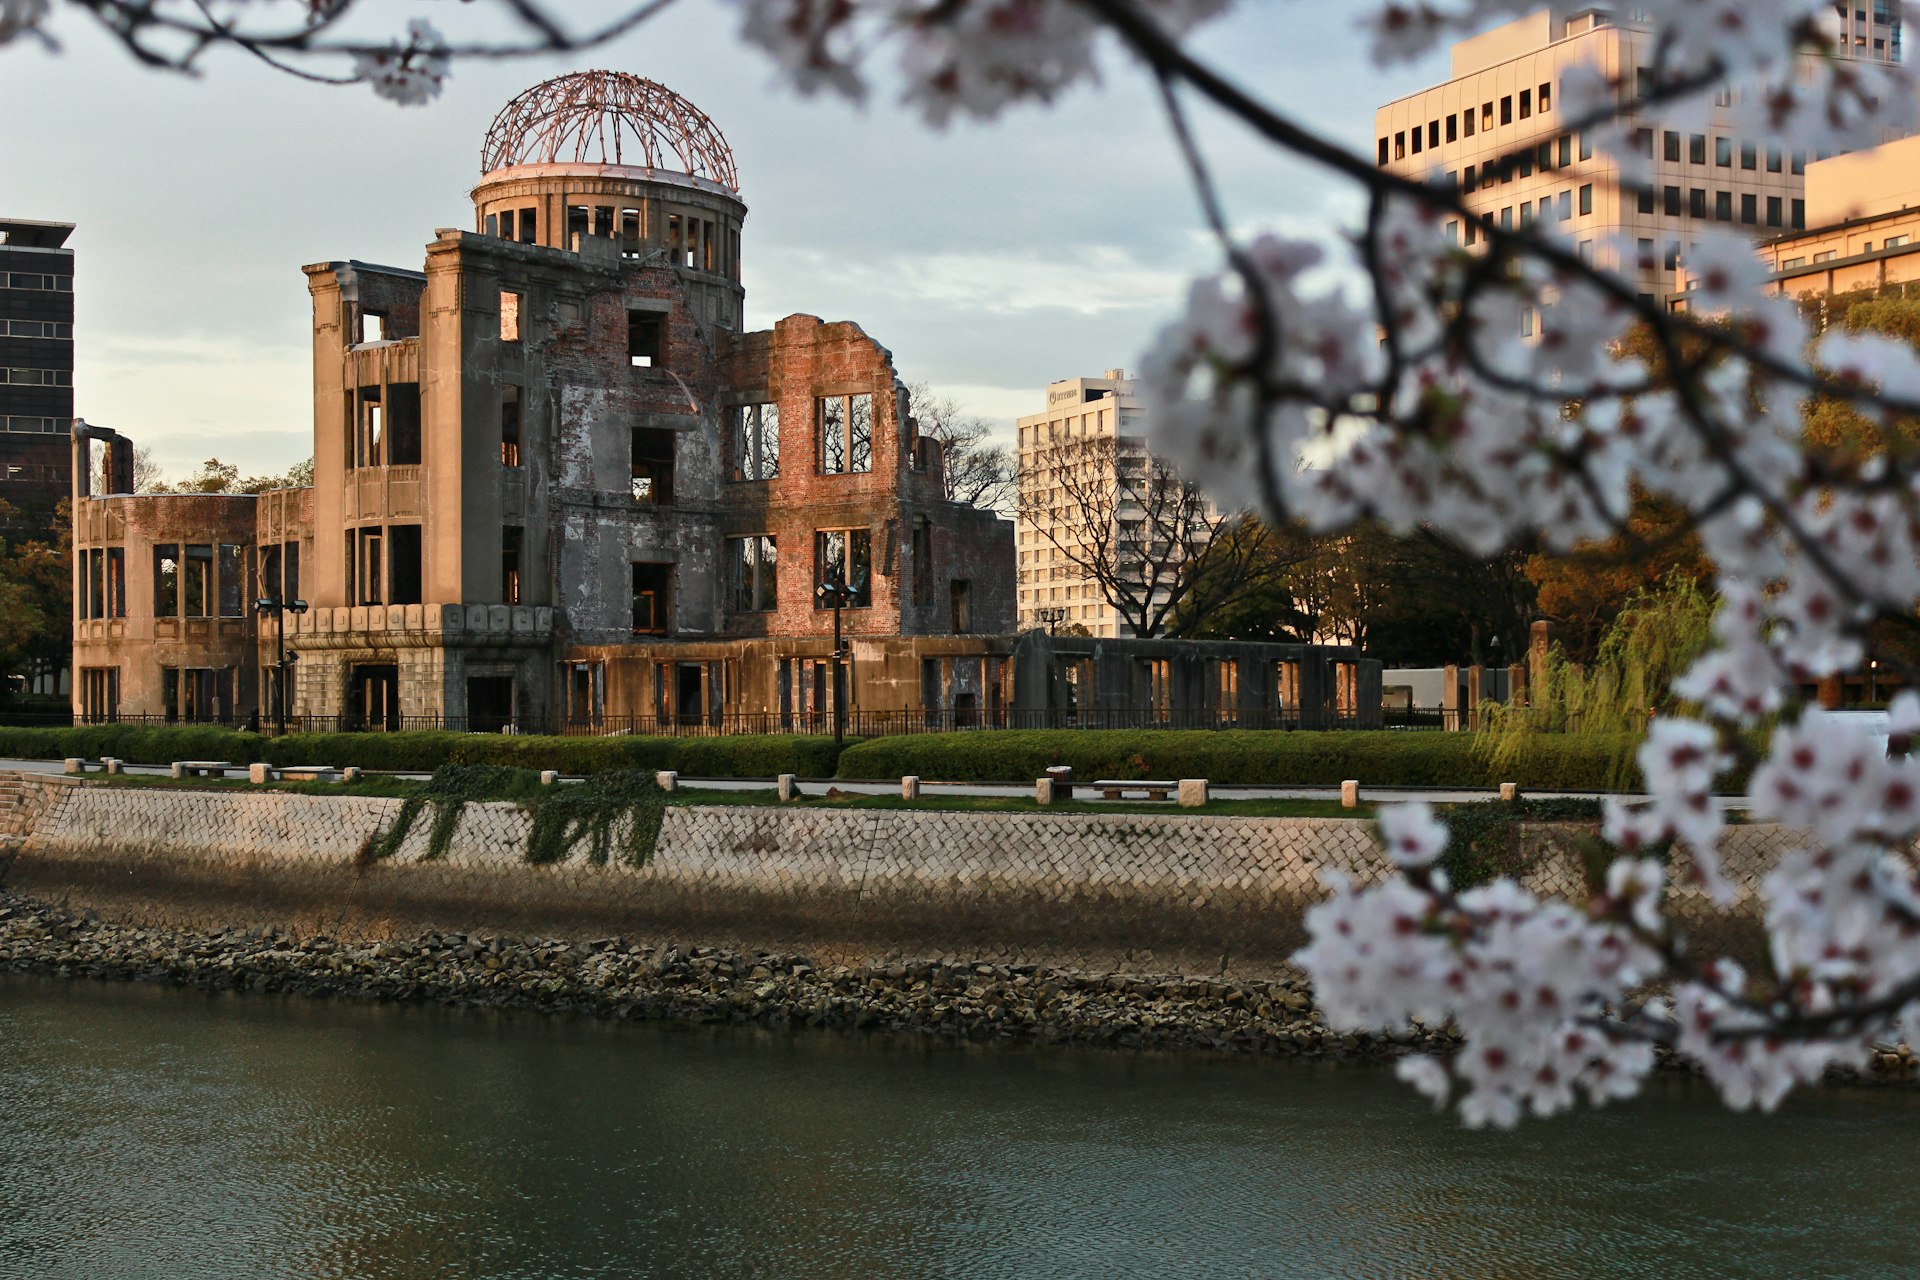 The famous Atomic Bomb Dome in Hiroshima, Japan 